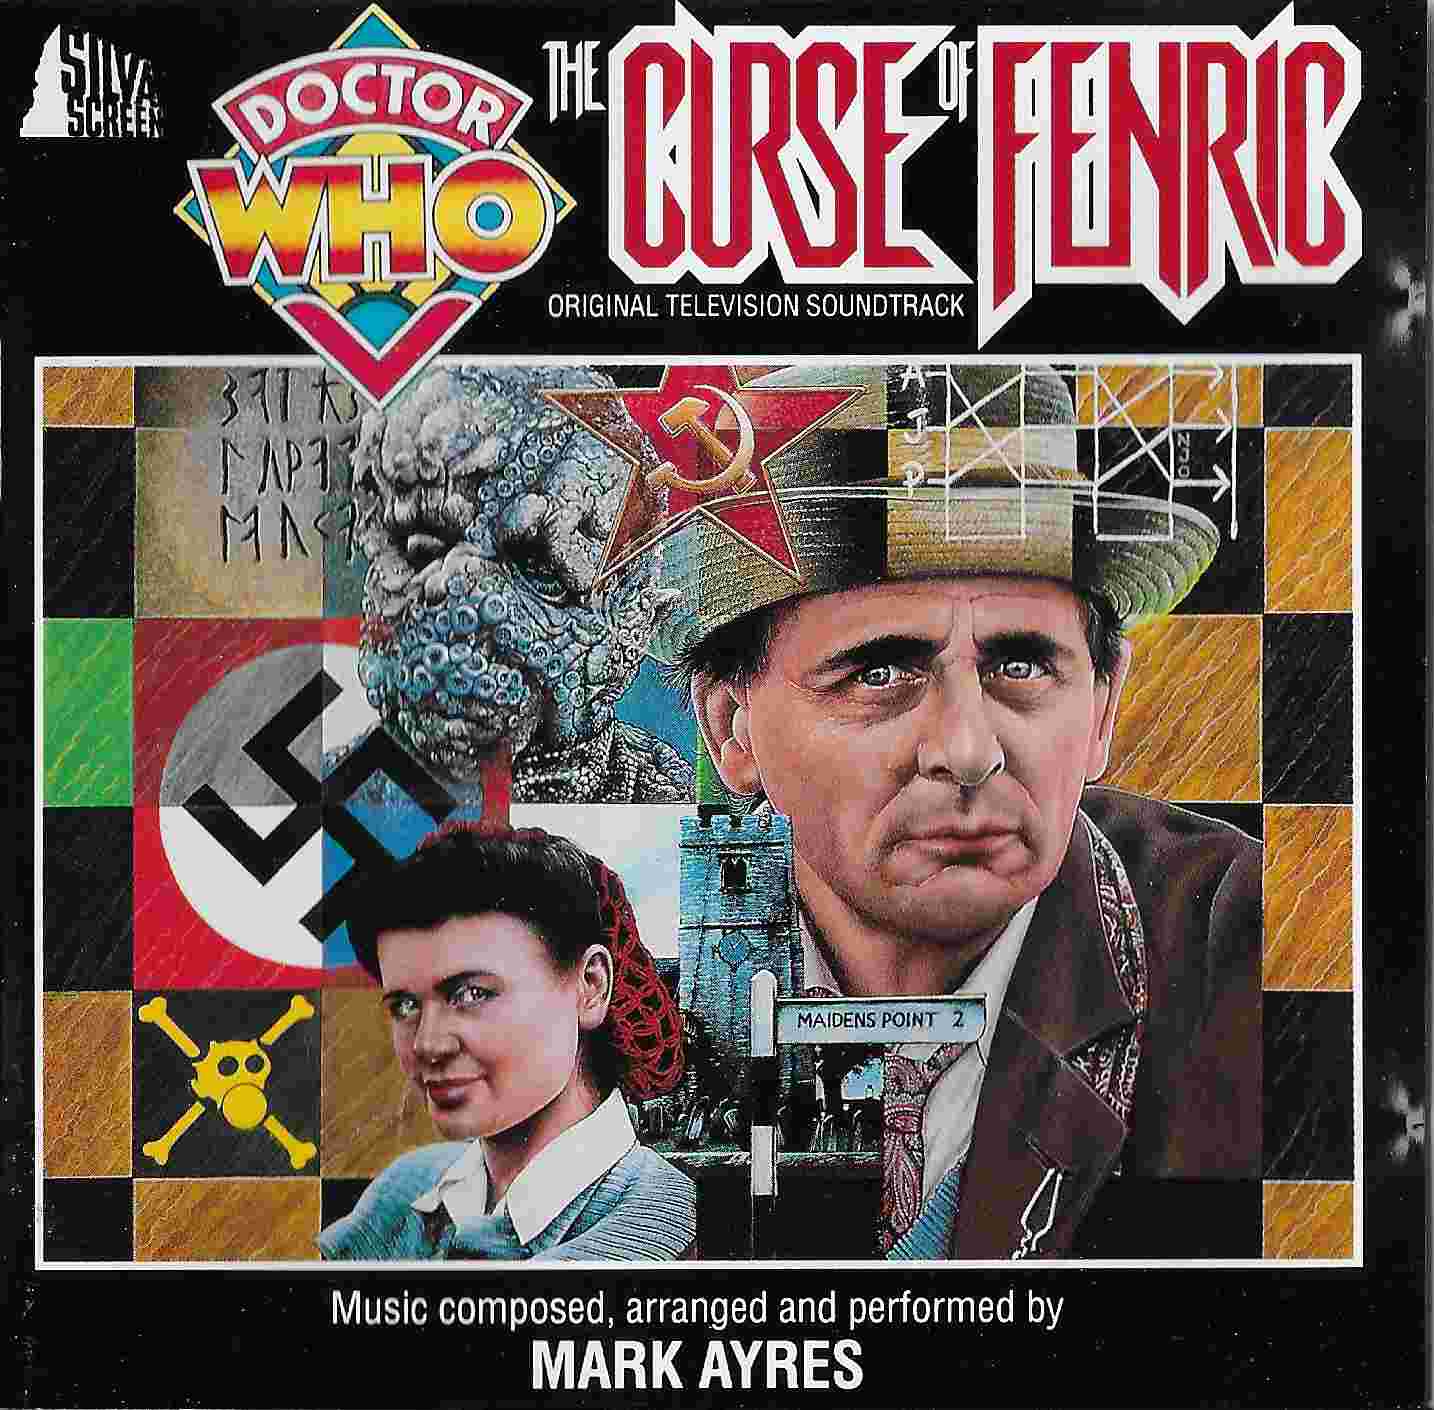 Picture of Doctor who - The curse of Fenric by artist Mark Ayres from the BBC cds - Records and Tapes library